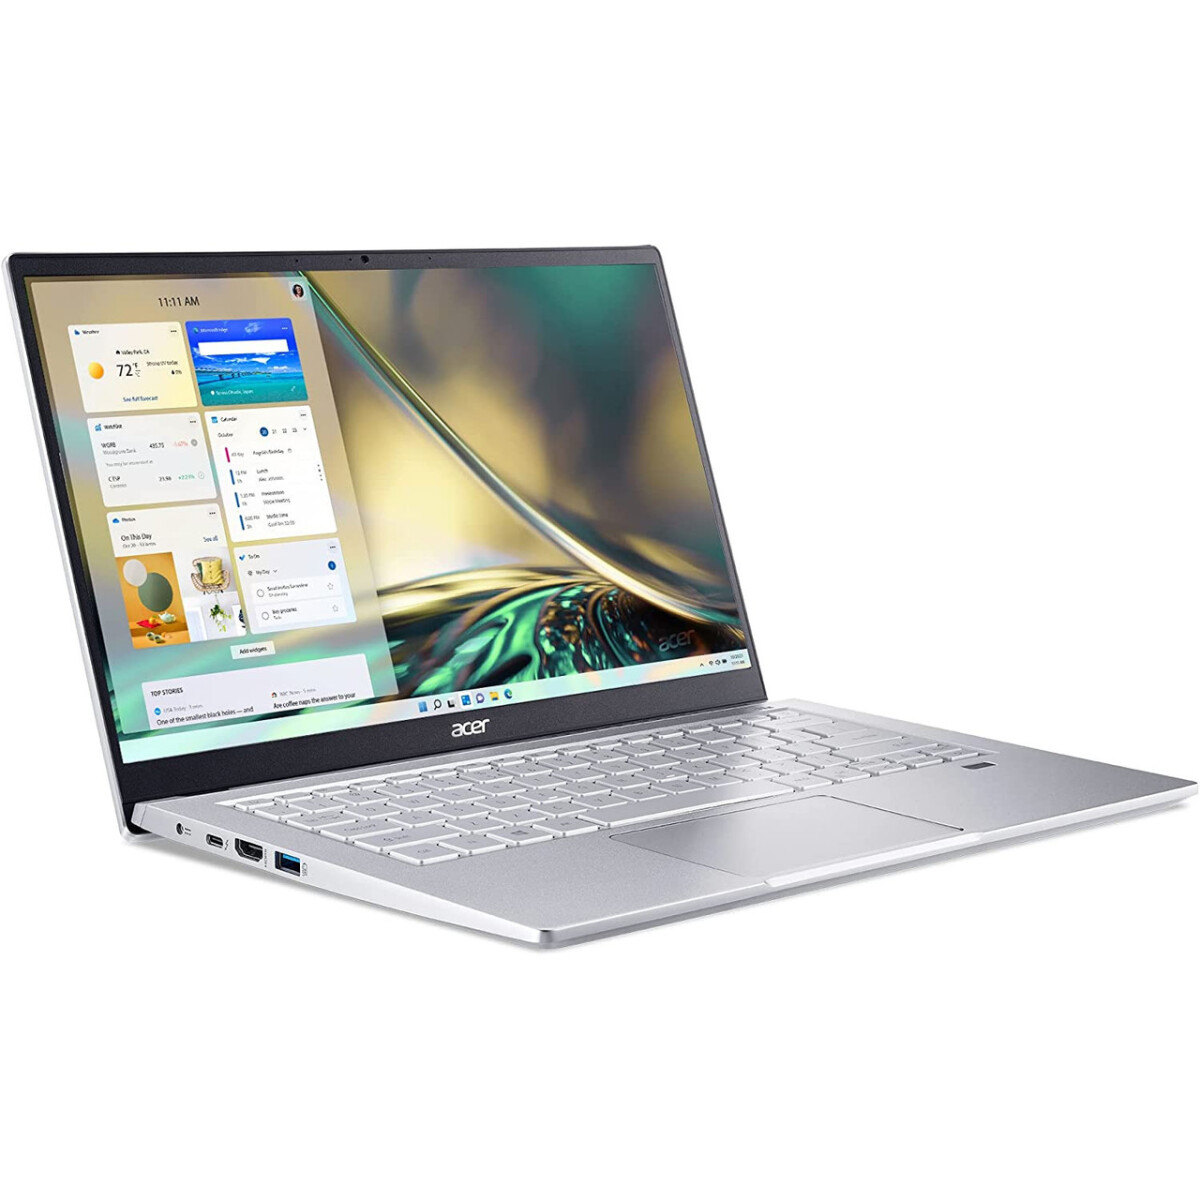 Notebook Acer Swift 3 I7 8gb 512ssd Fhd 